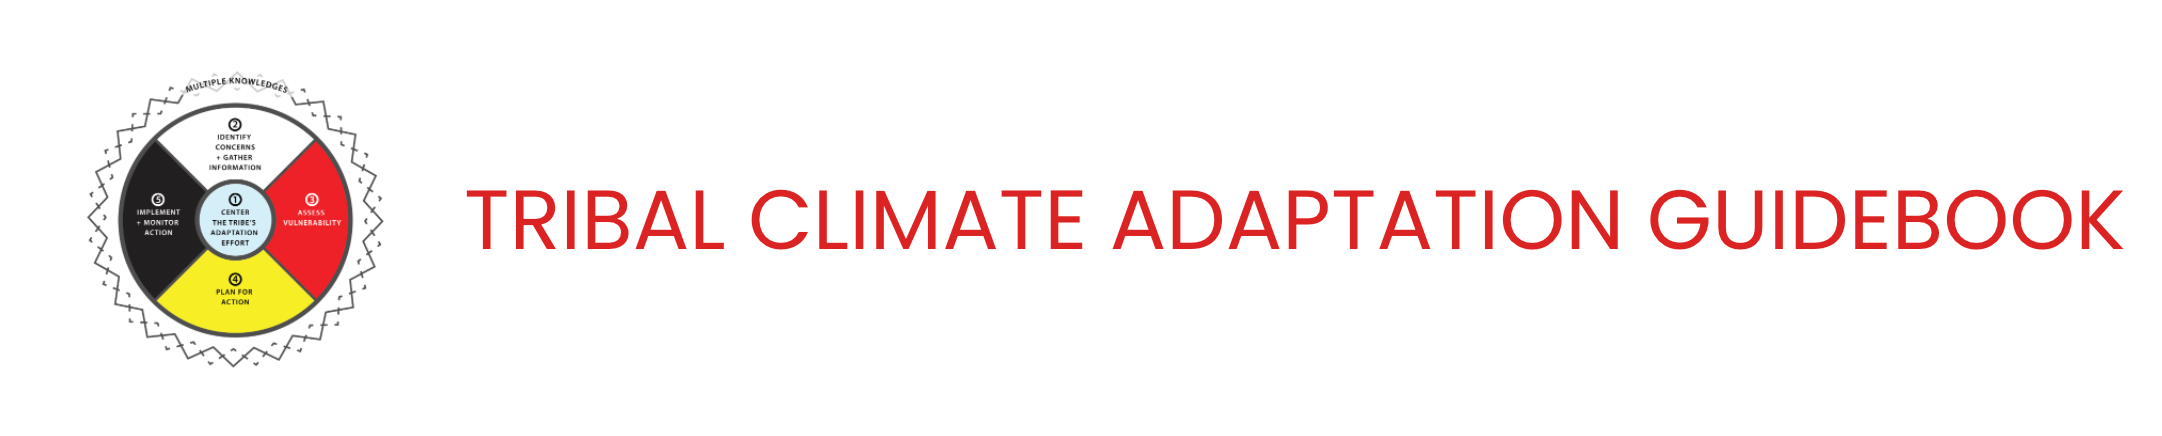 Tribal Climate Adaptation Guidebook